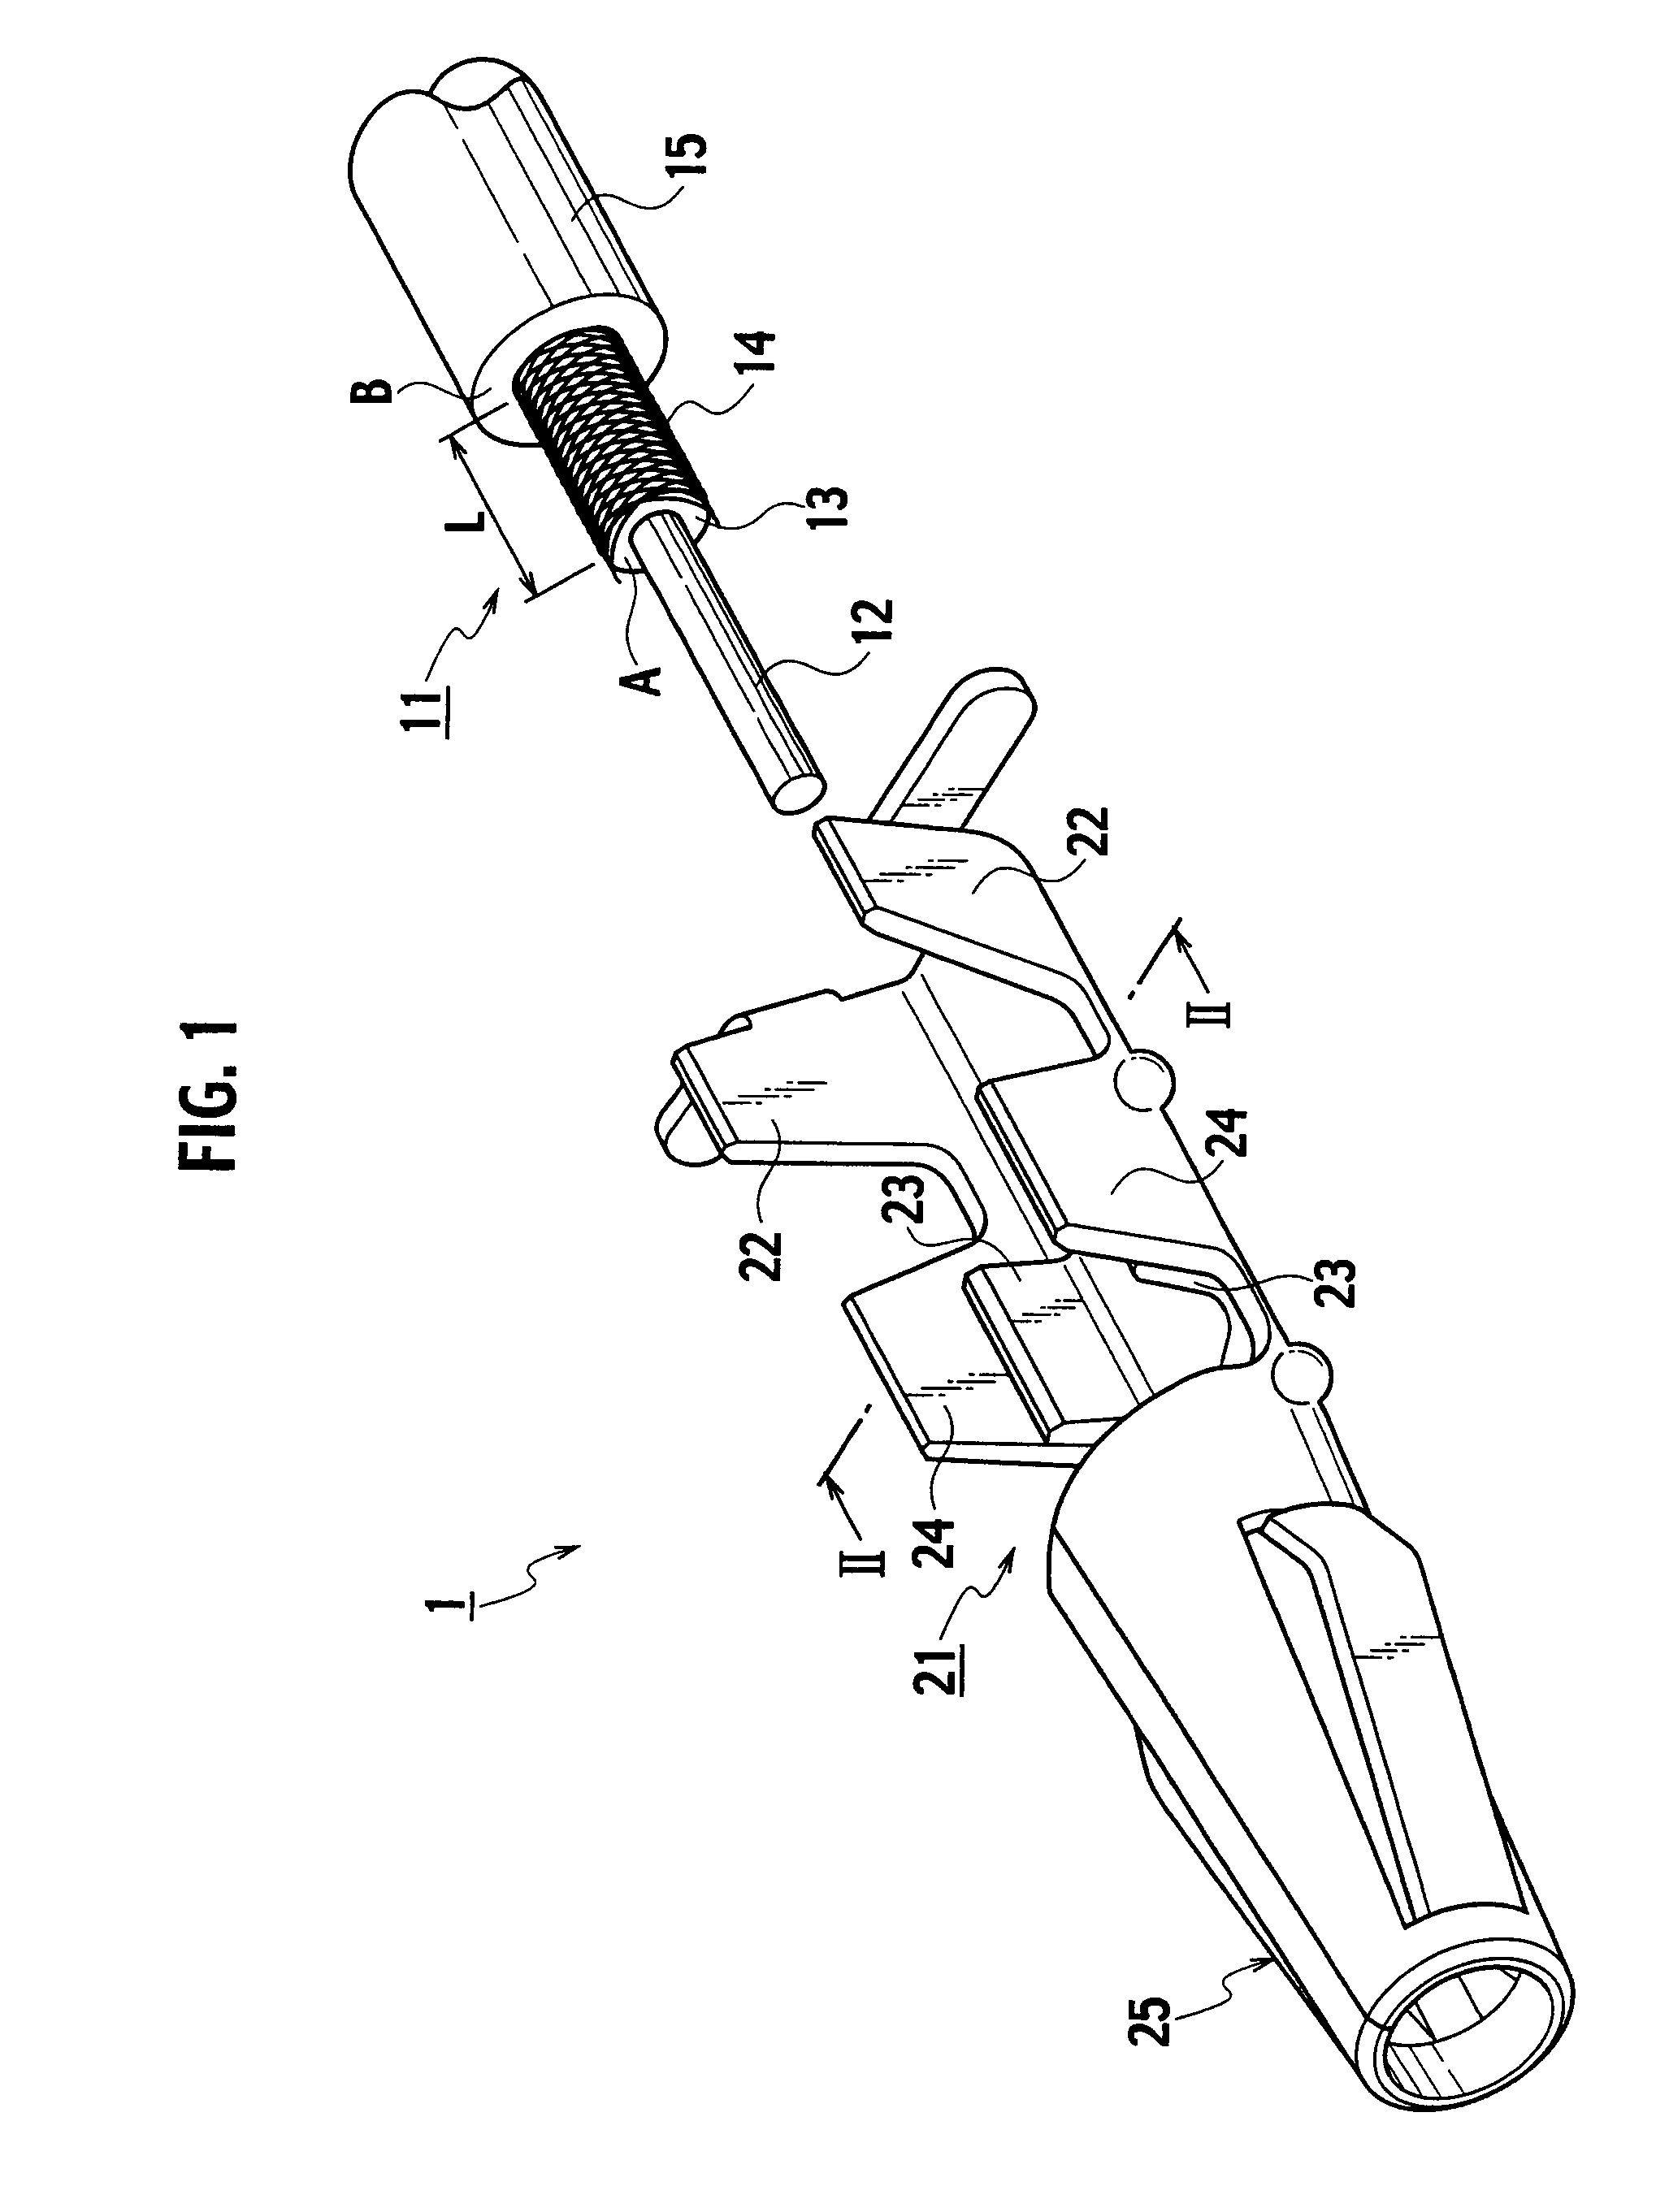 Coaxial Cable Connector and Coaxial Cable Connection Unit